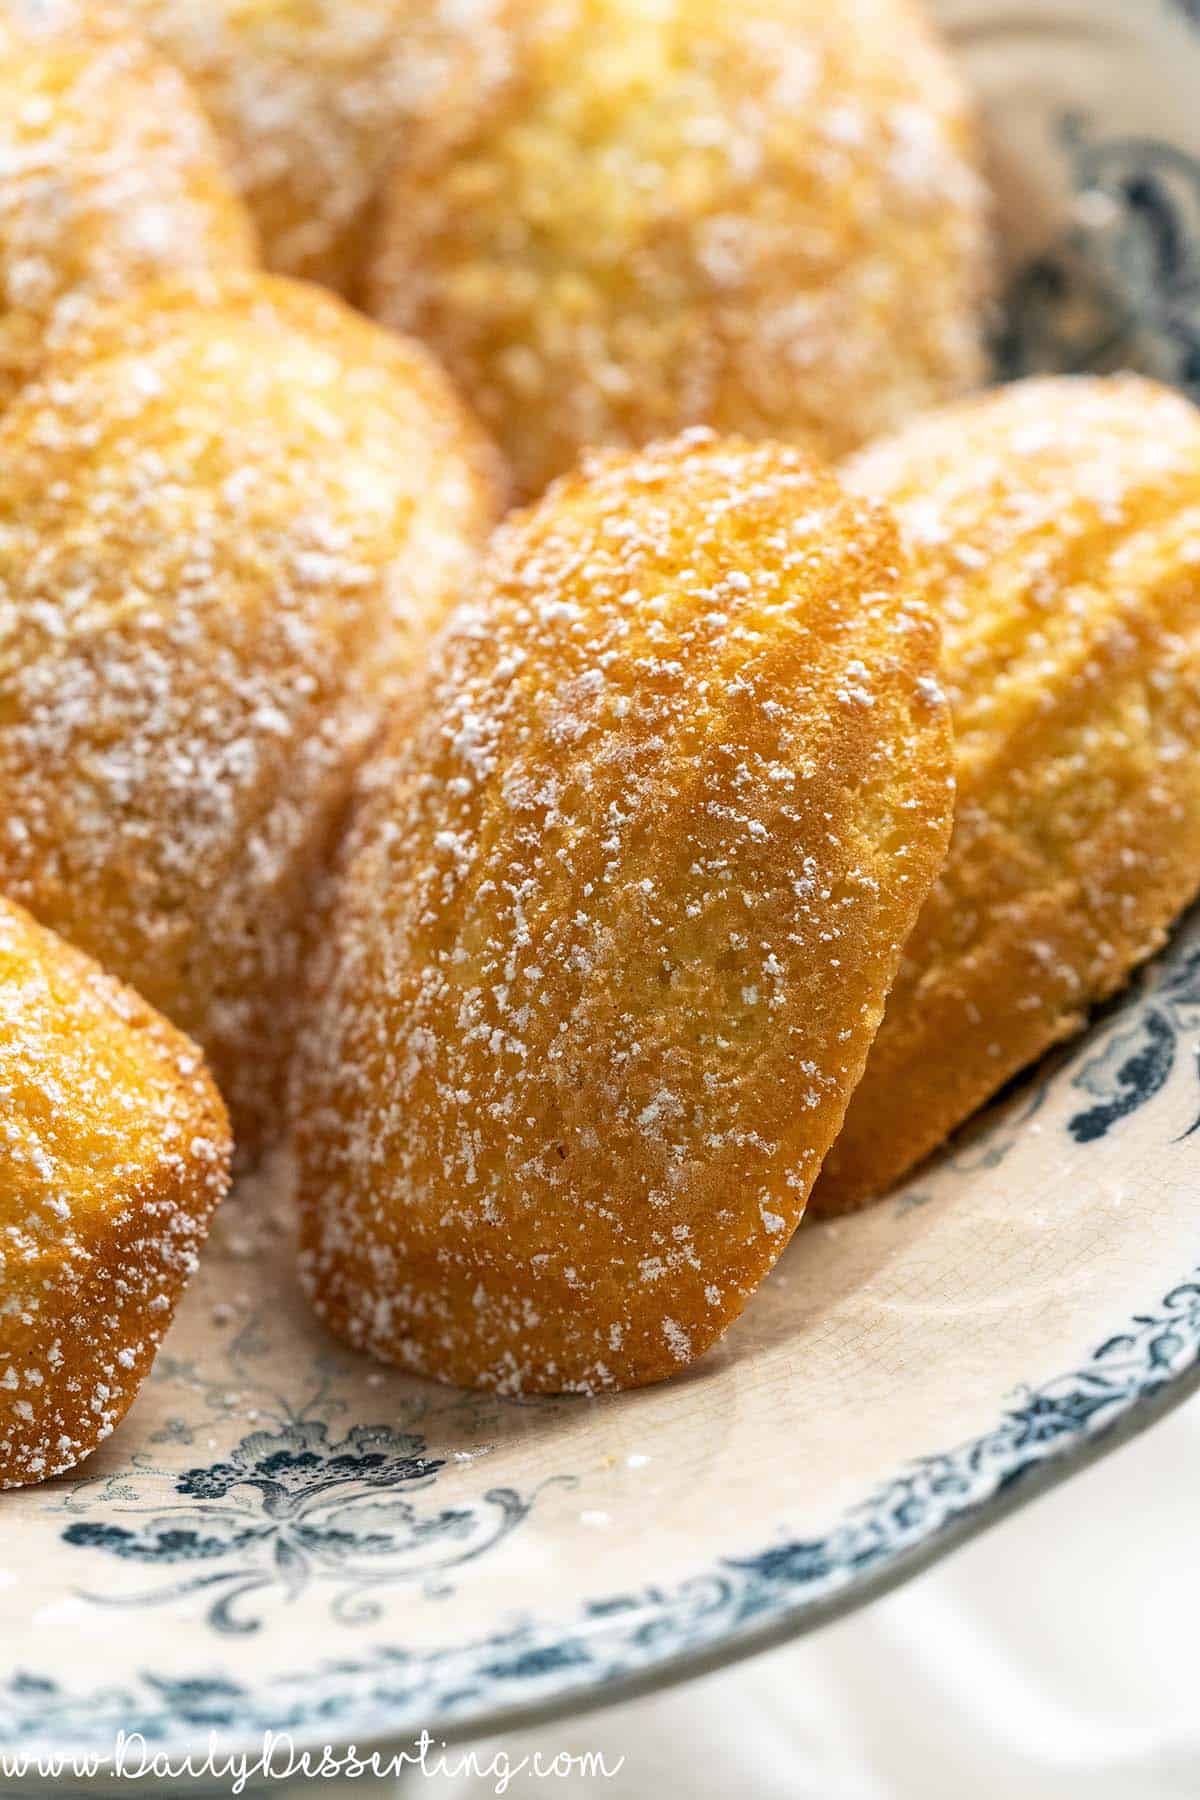 shell shaped traditional madeleines dusted wtih powdered sugar on french pastry platter